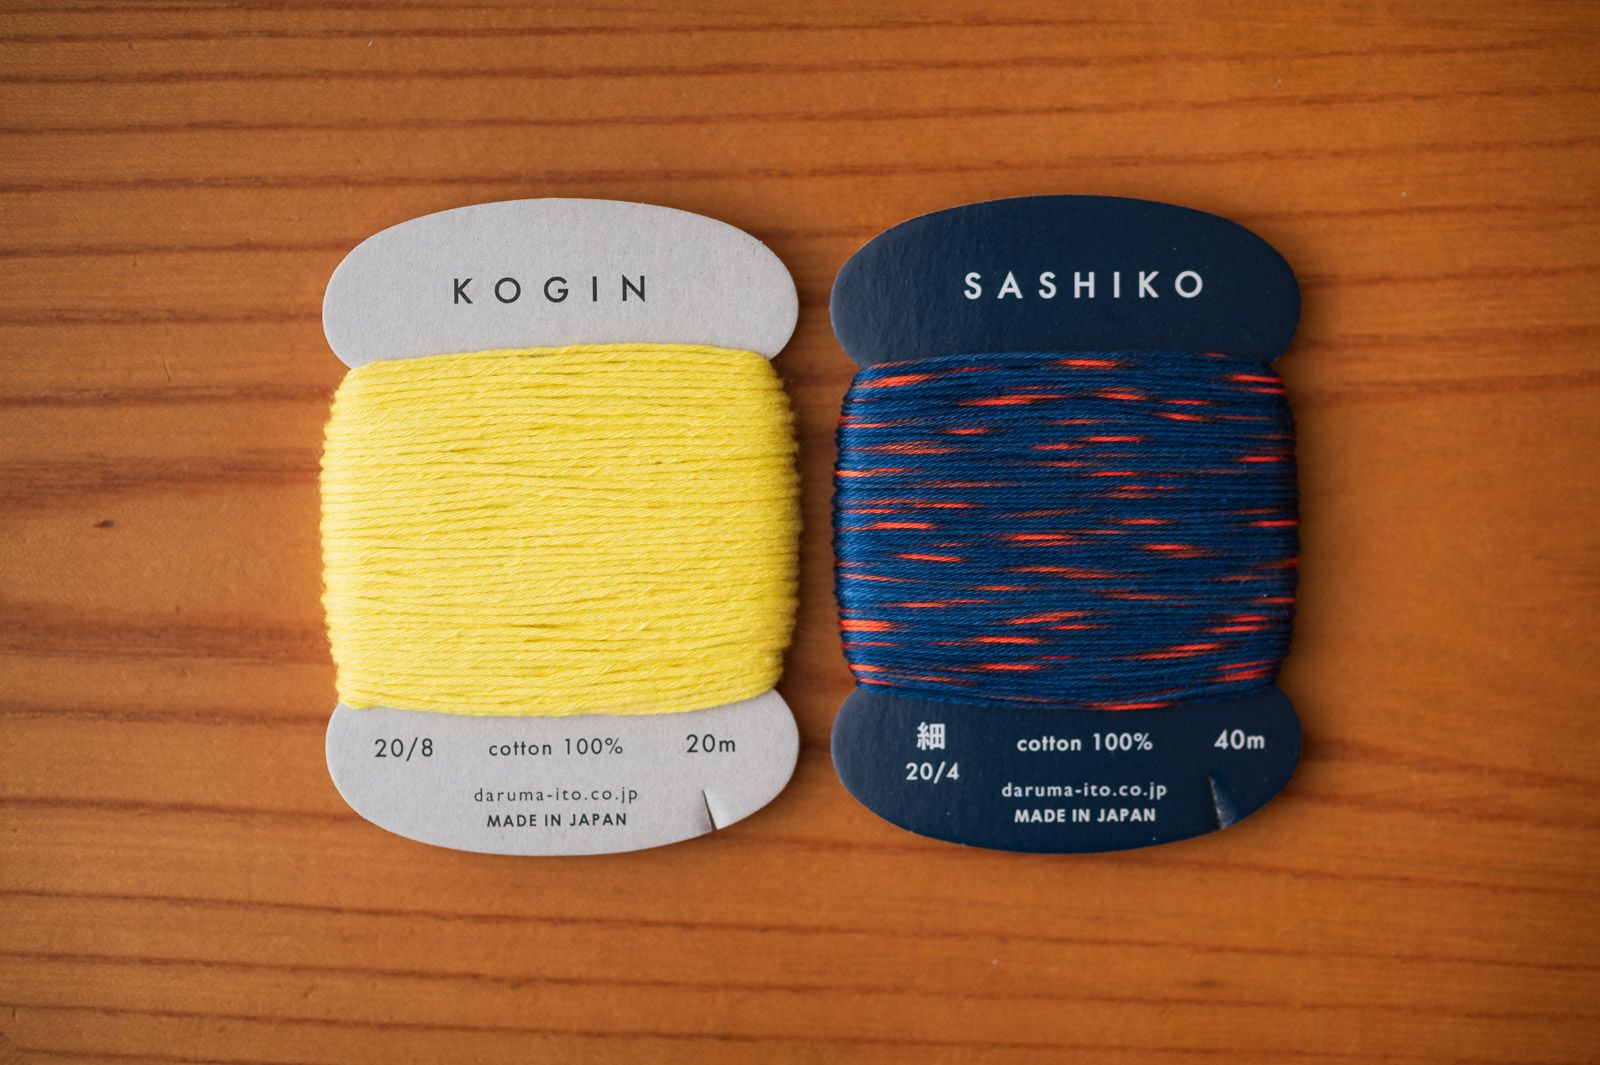 Yellow kogin thread and variegated sashiko thread in read and blue by Daruma on a table